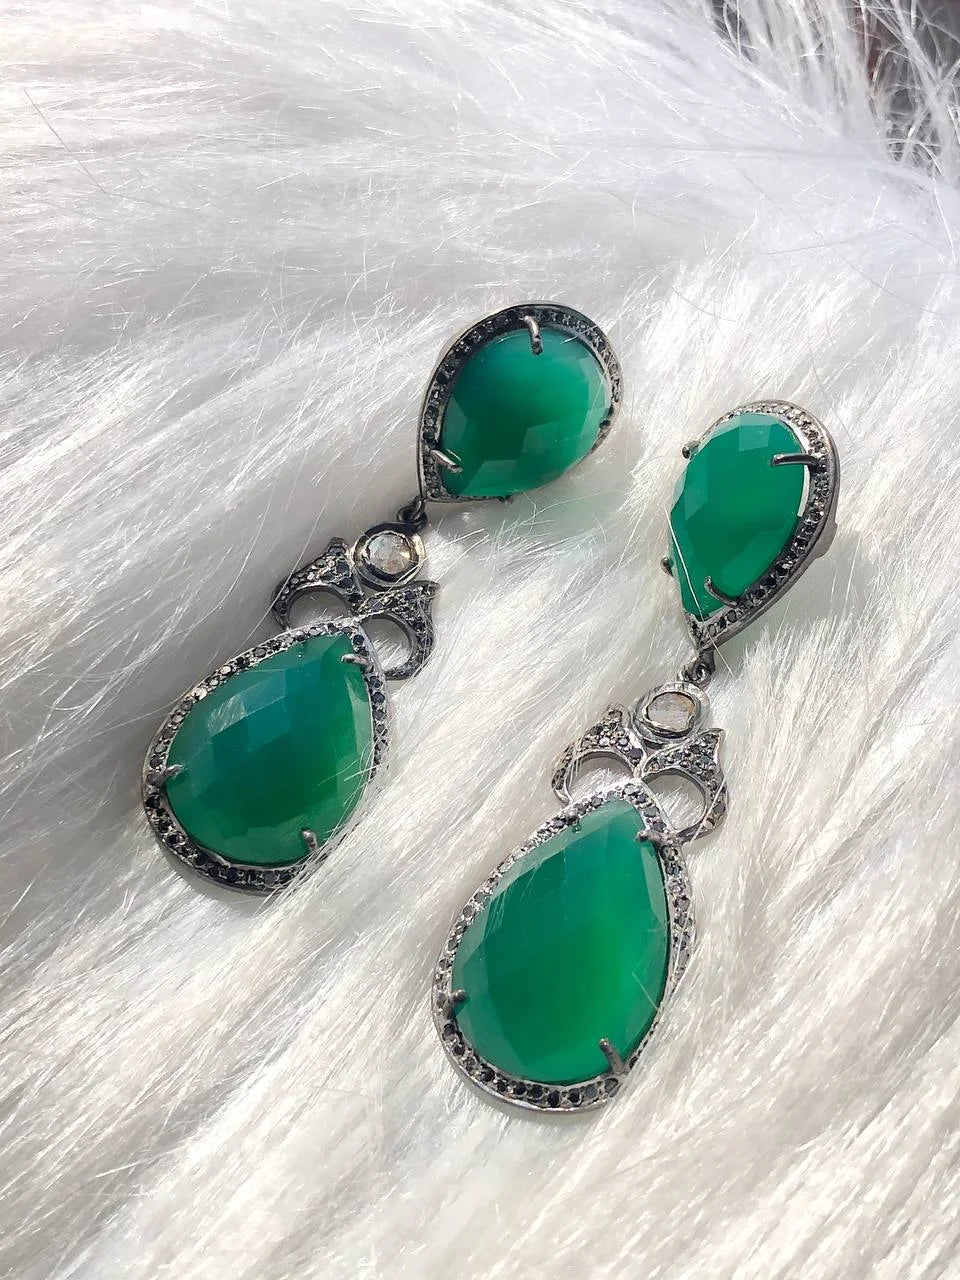 Art Deco Sterling Silver Emerald Dangle Earrings: Exquisite & Delicate Statement Jewelry